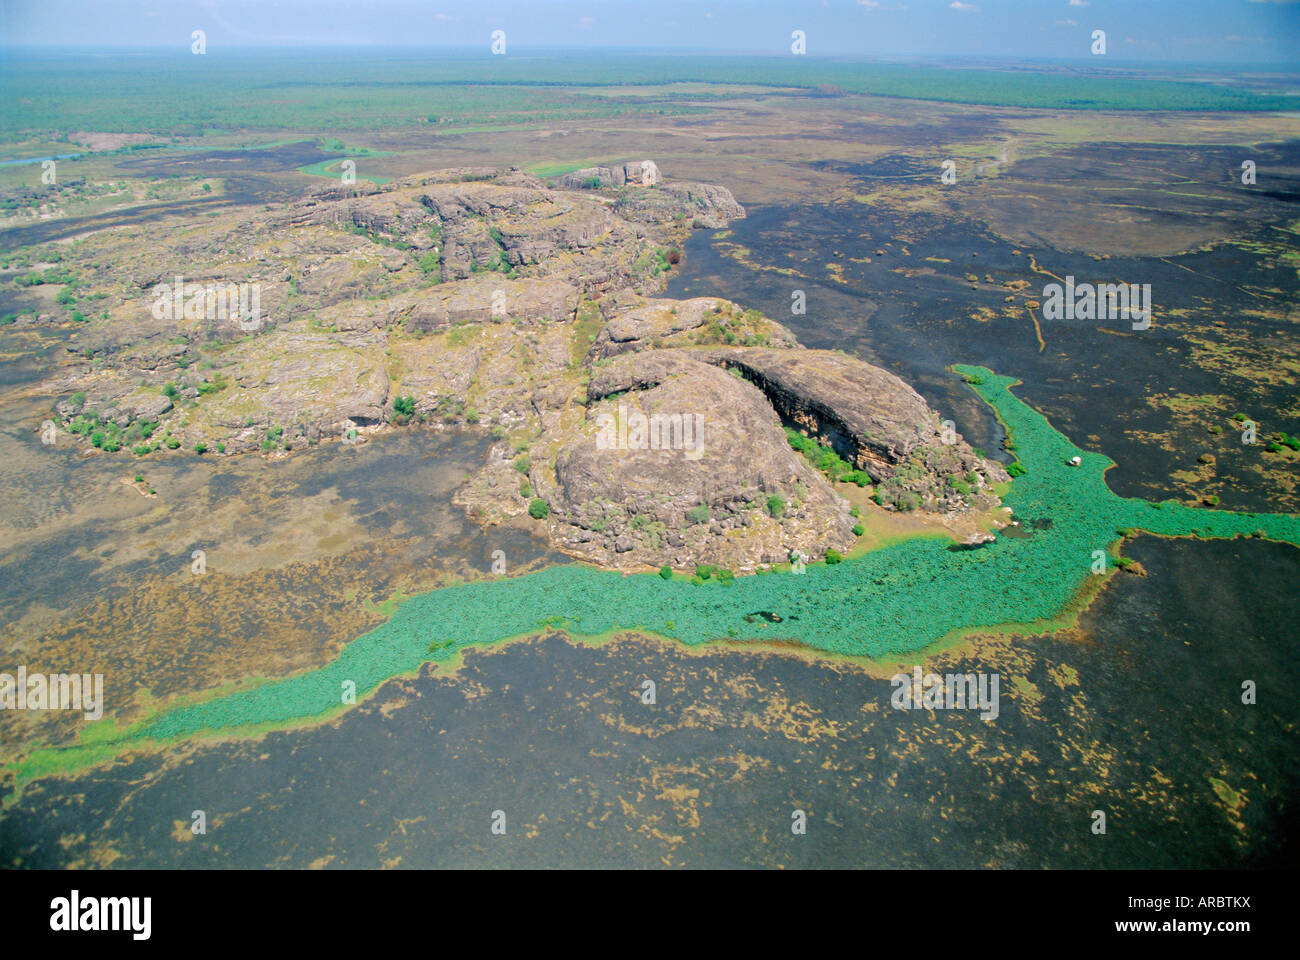 Backwater of a river on the floodplain of the East Alligator River, Northern Territory, Australia Stock Photo